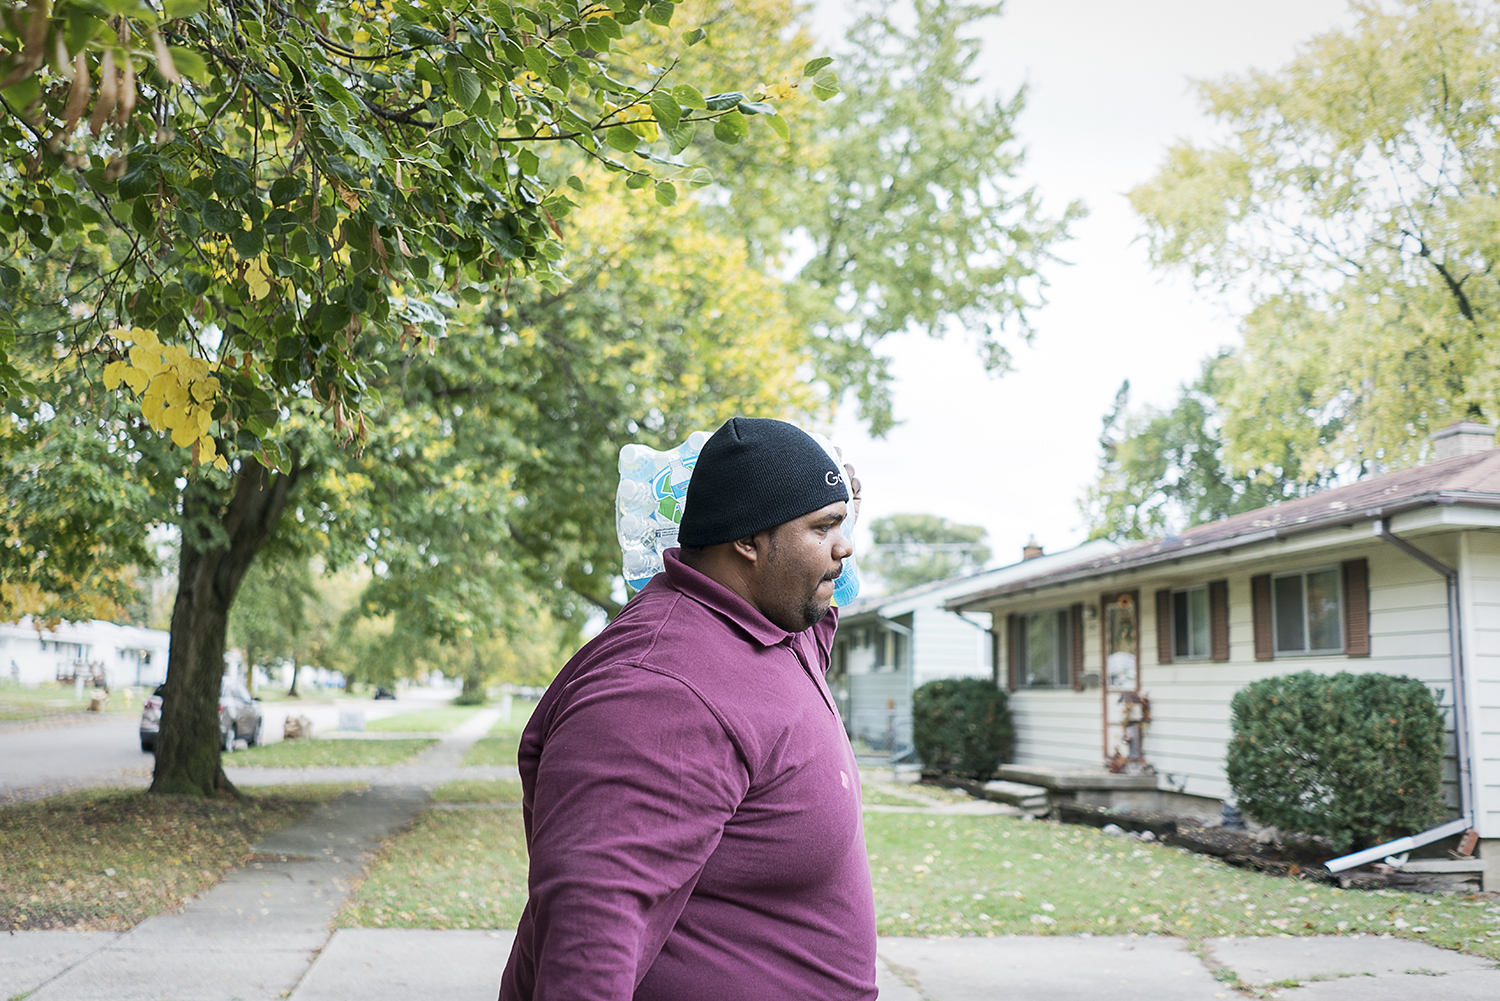 With a case of water bouncing on his shoulder, Flint resident William Harris, 31, walks up the sidewalk to a home on the eastside of Flint. 